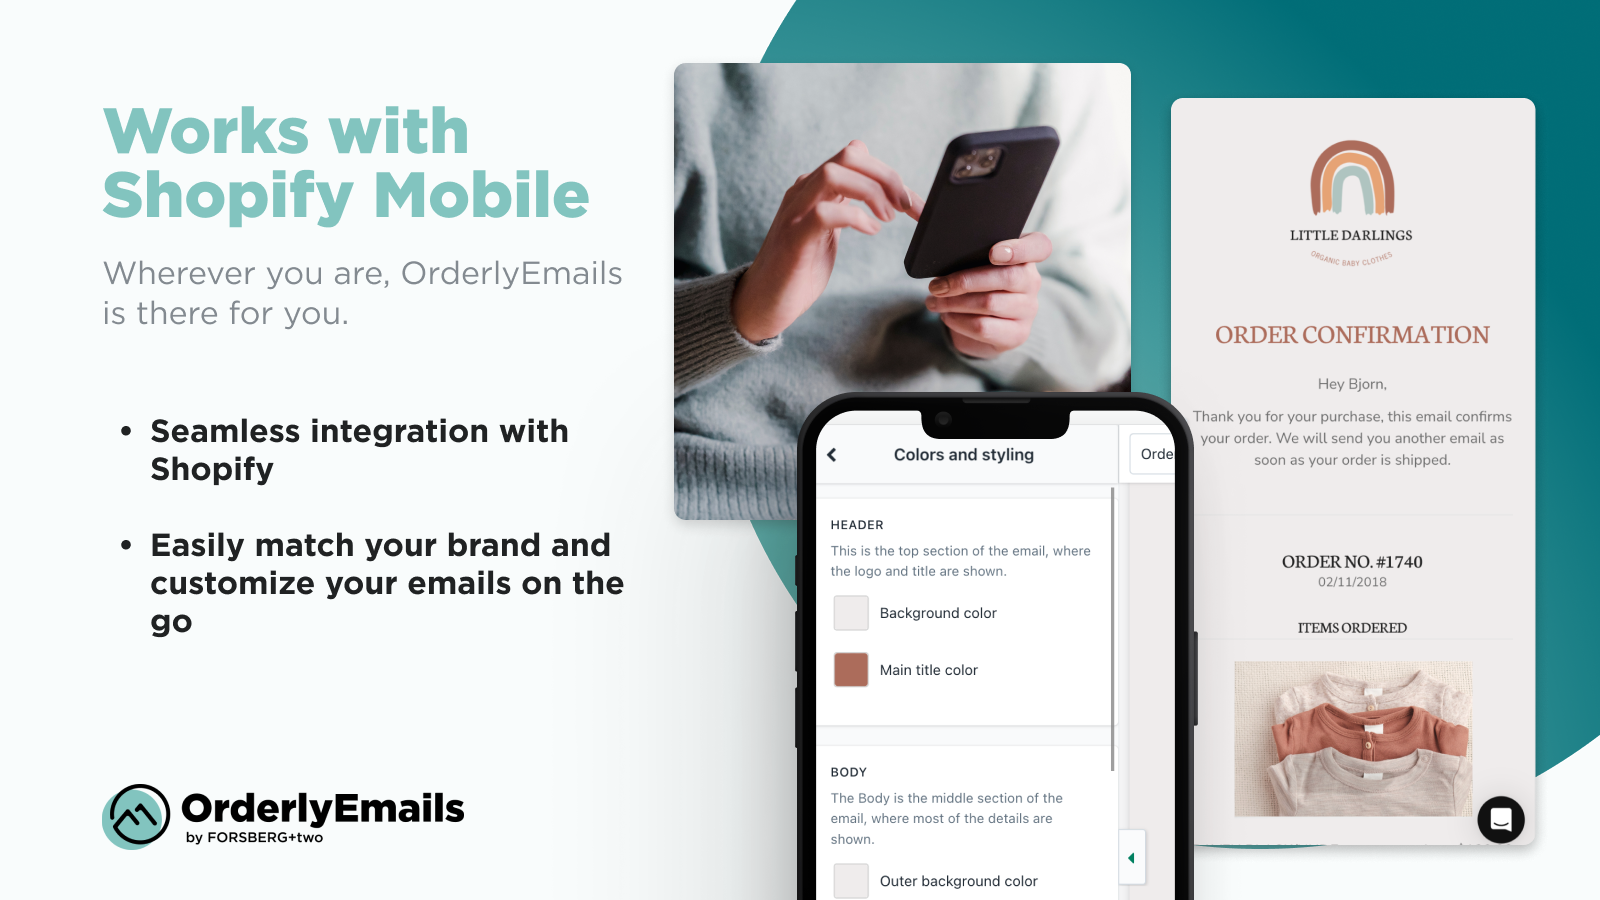 OrderlyEmails: 与Shopify Mobile兼容